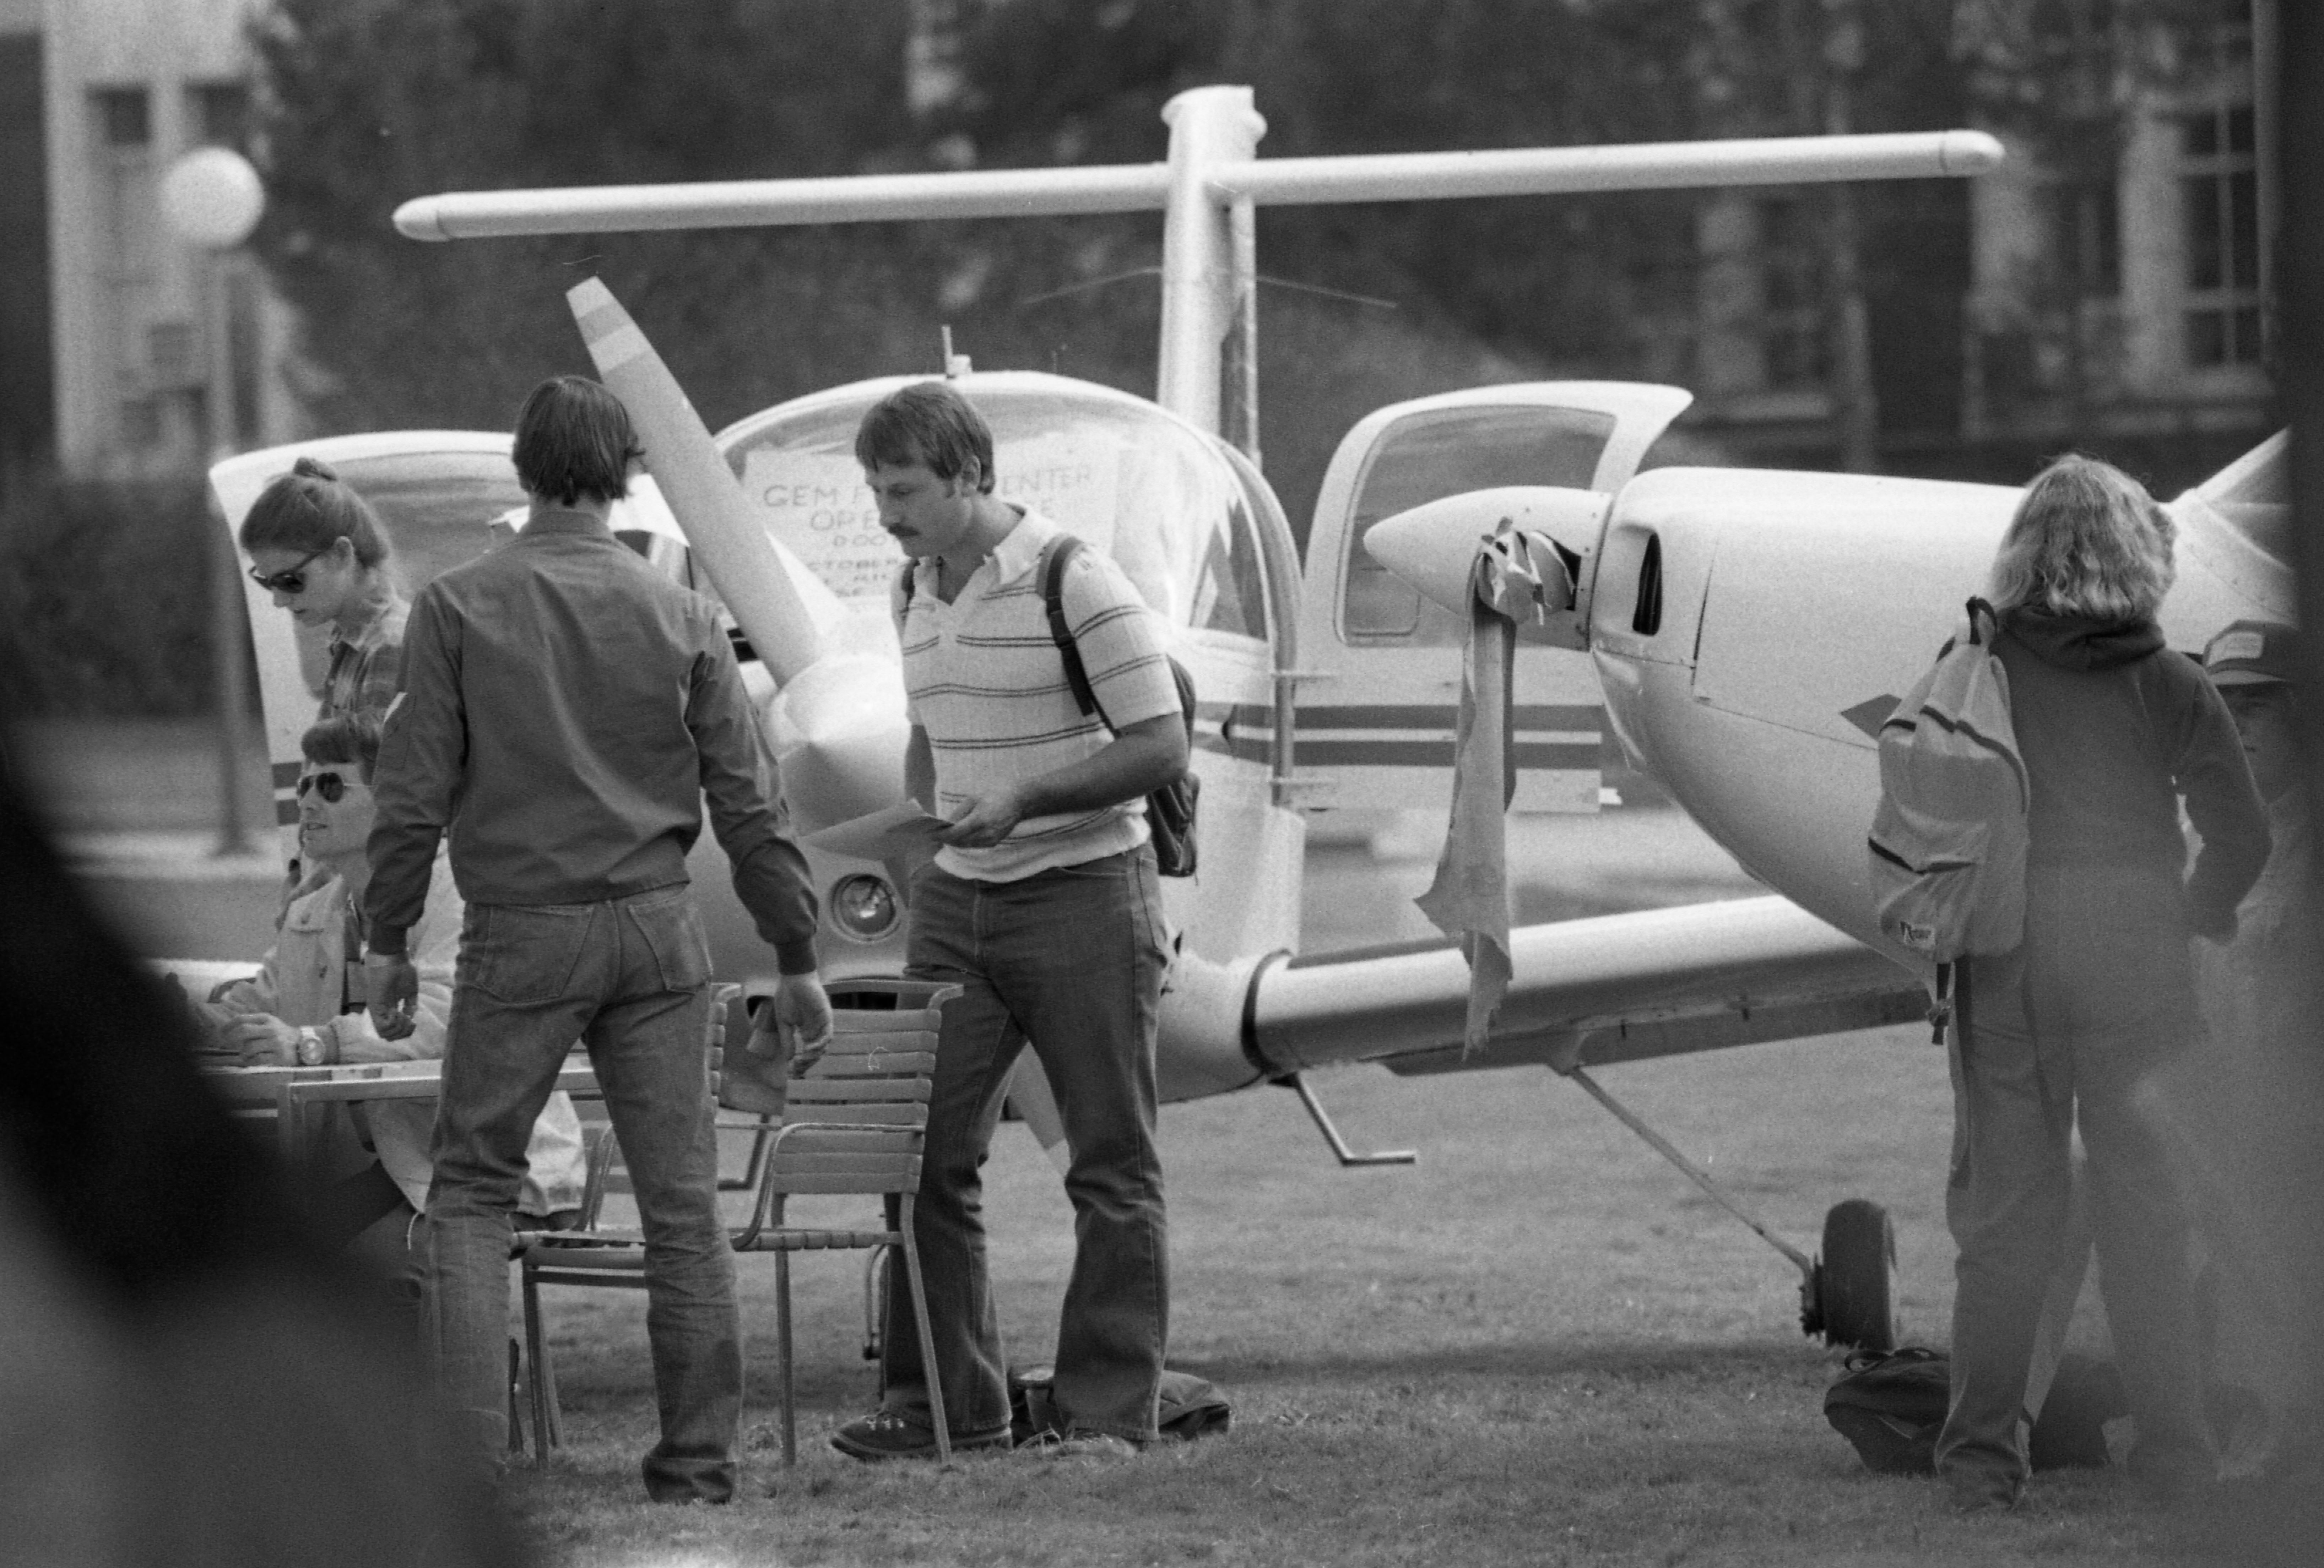 Two students examine an airplane on the university campus.